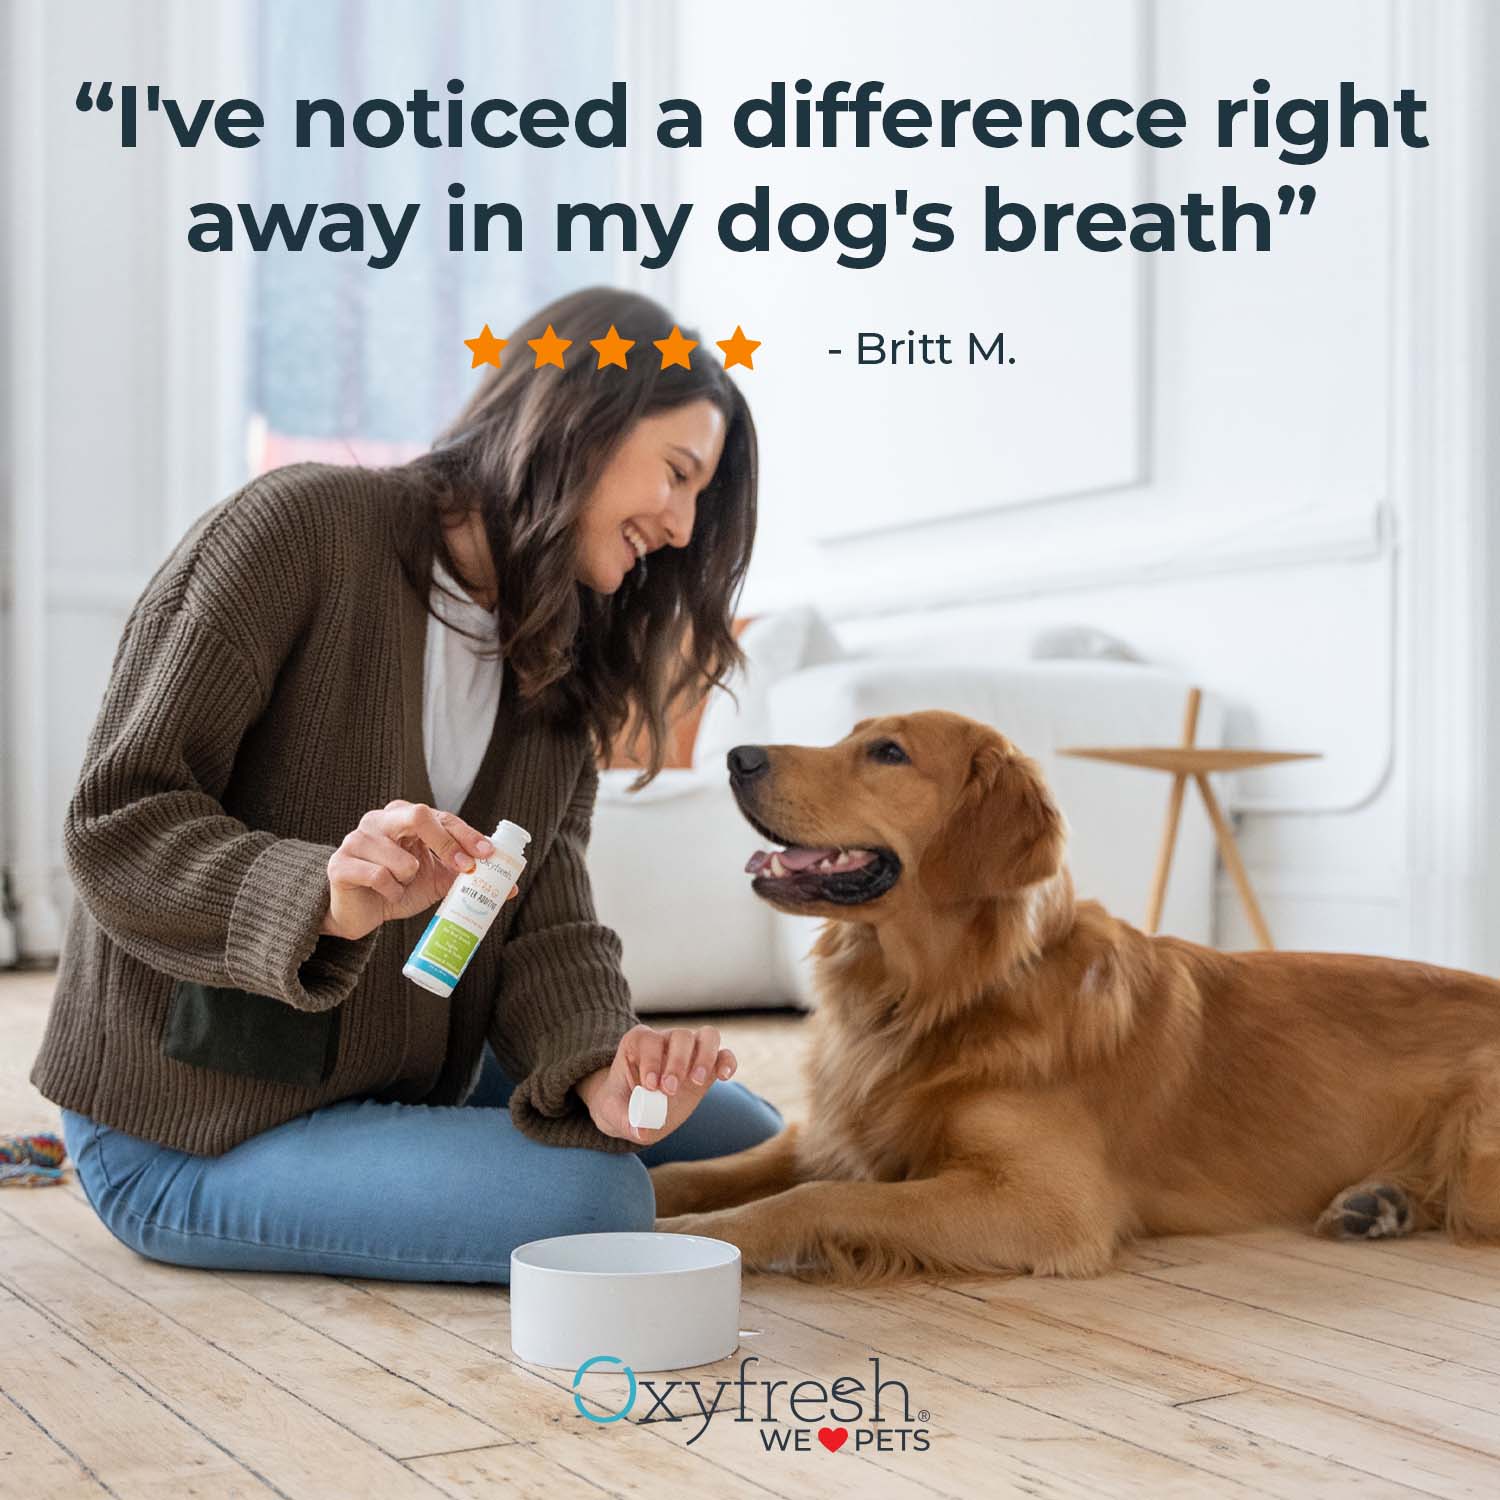 oxyfresh-pet-dental-kit-review-"I've-noticed-a-big-difference-right-away-in-my-dog's-breath"